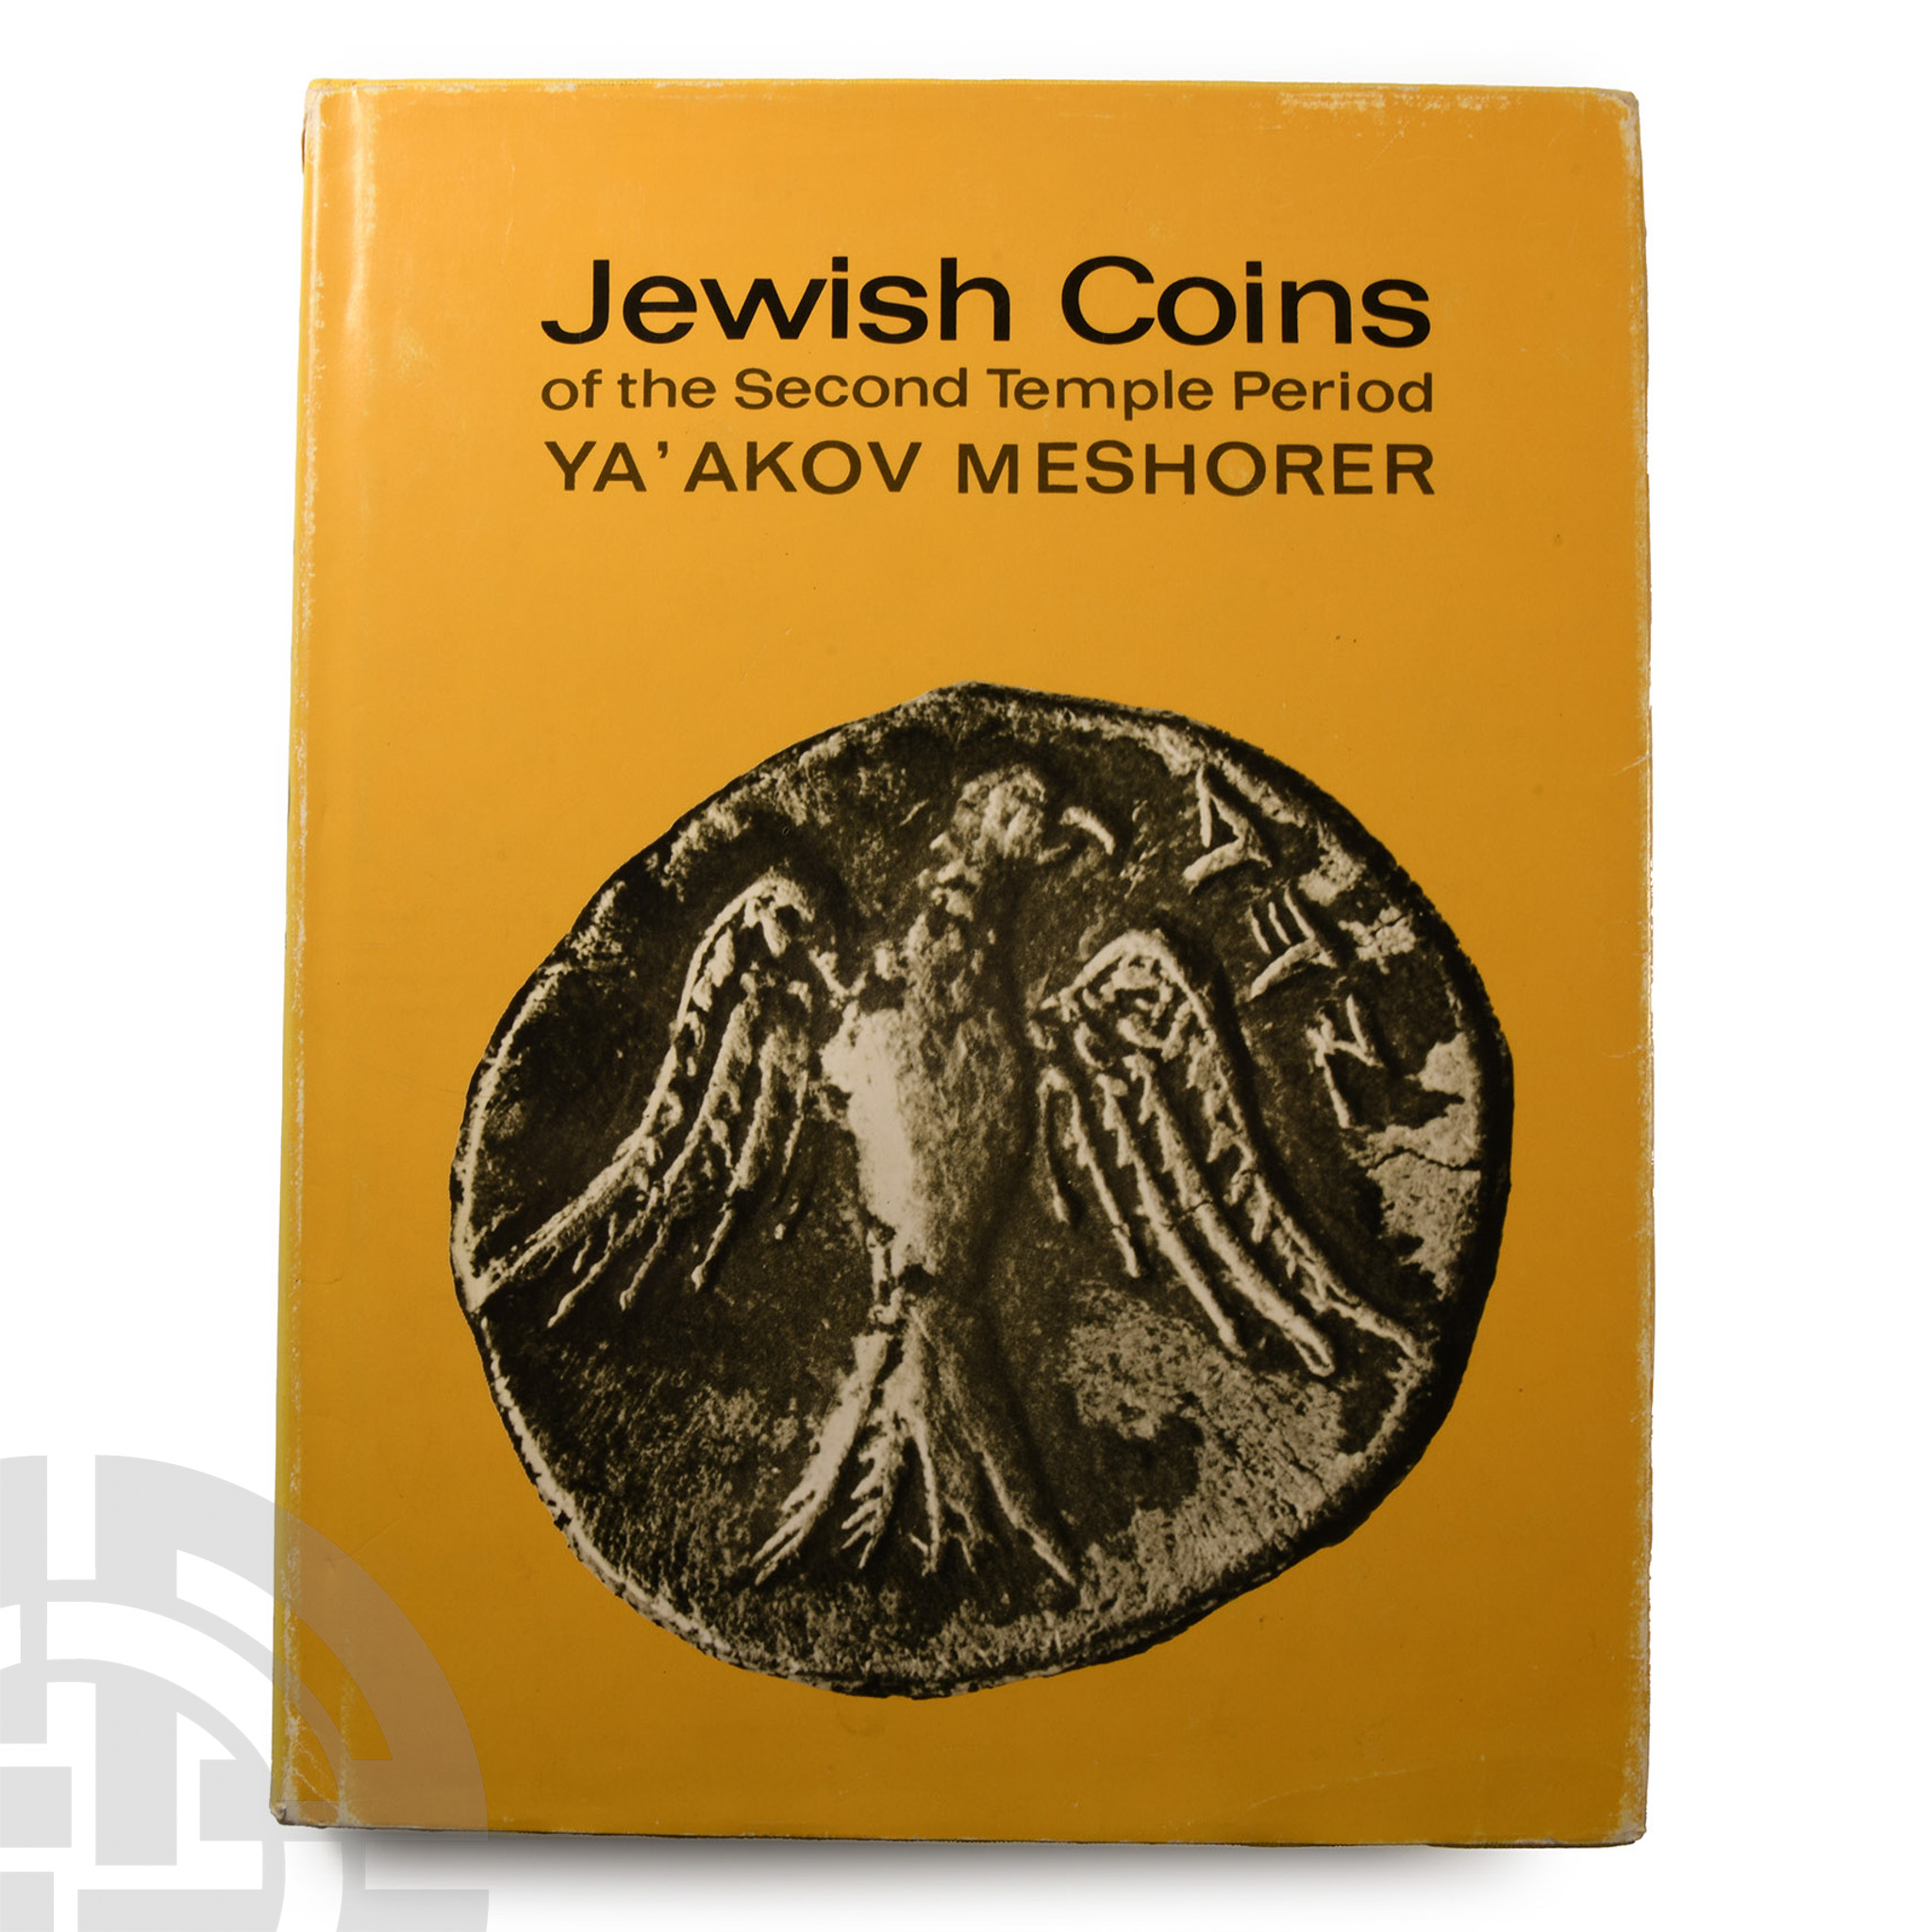 Numismatic Books - Jewish Coins of the Second Temple Period